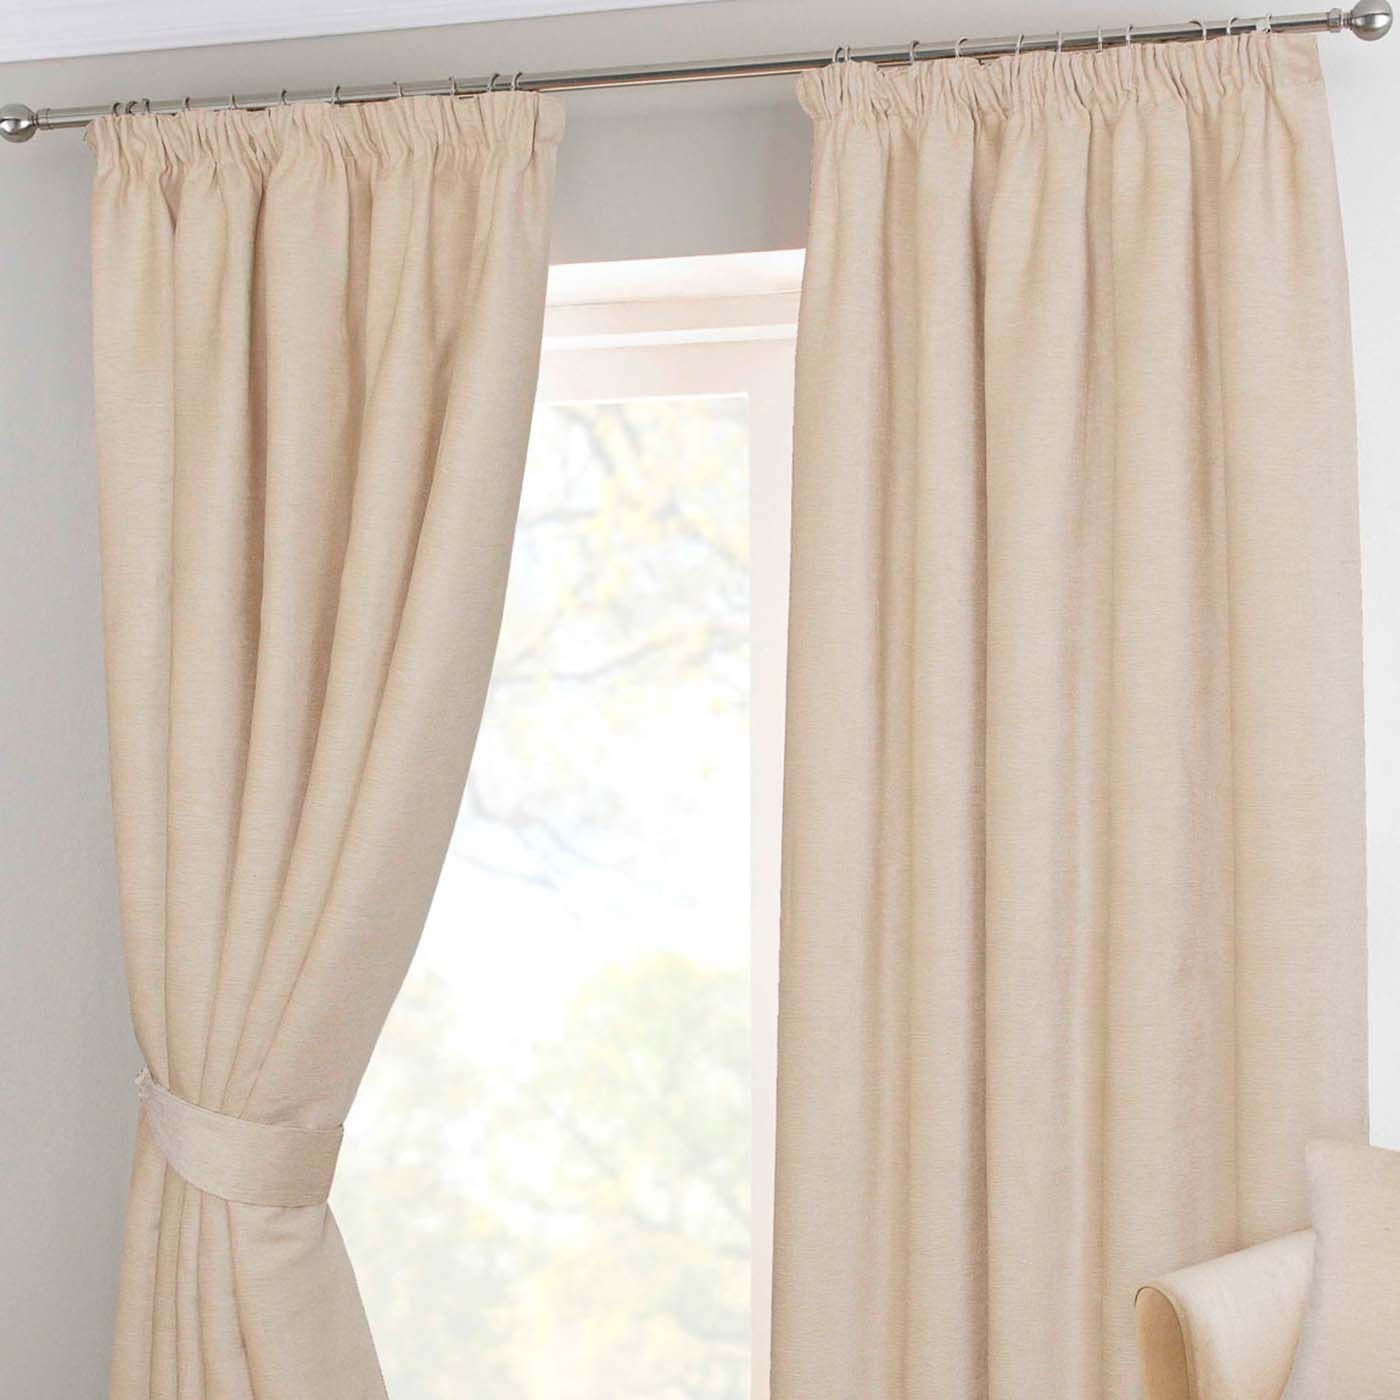 Heavy Chenille Ready Made Pencil Pleat Fully Lined Curtains Pair With Tie Backs 